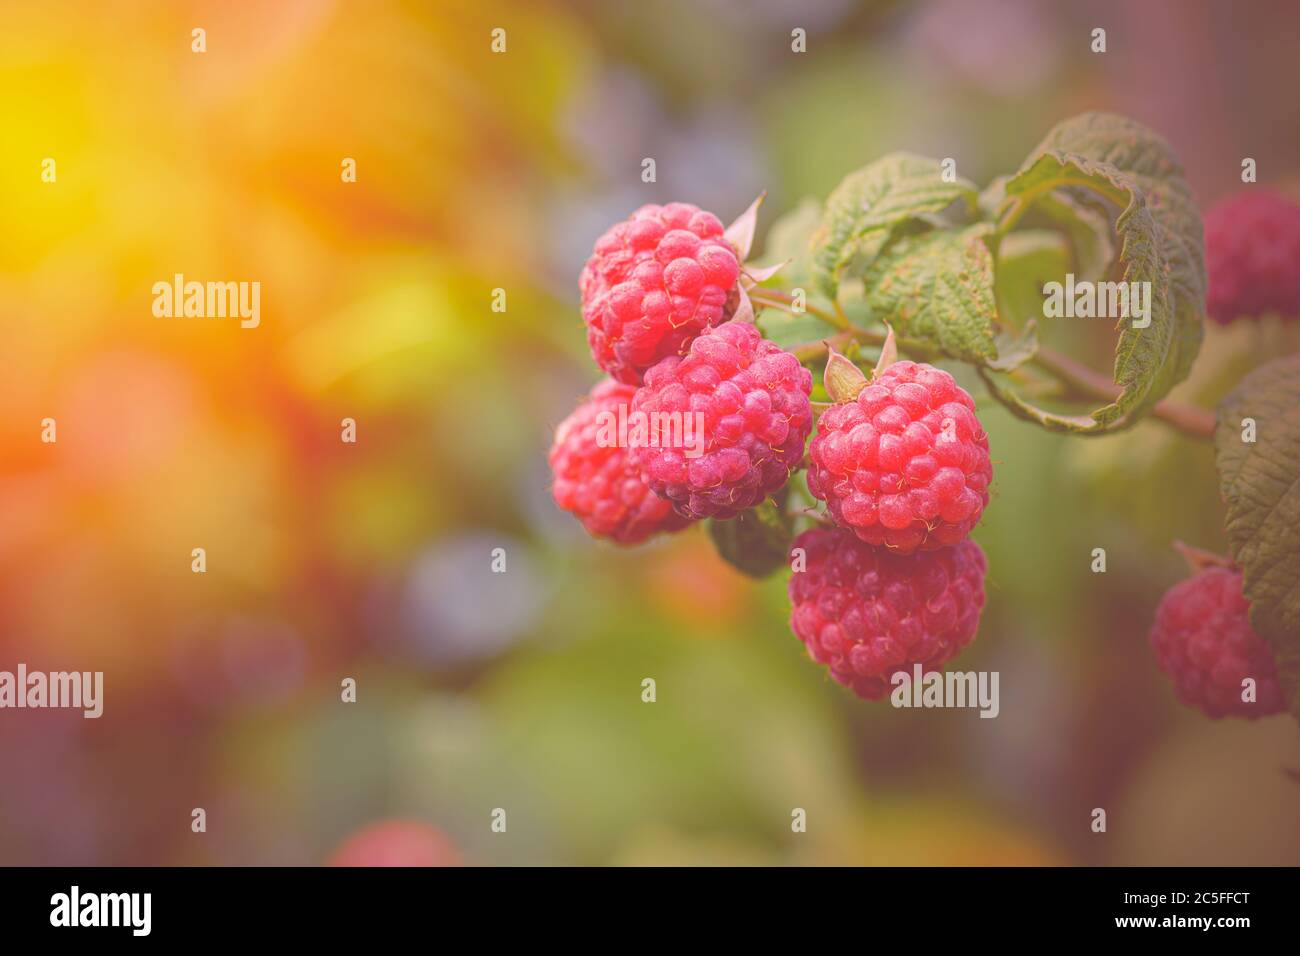 Raspberries in the sun. Raspberries on a branch in the garden. Red berry with green leaves in the sun. Photo of ripe raspberries on a branch. Stock Photo